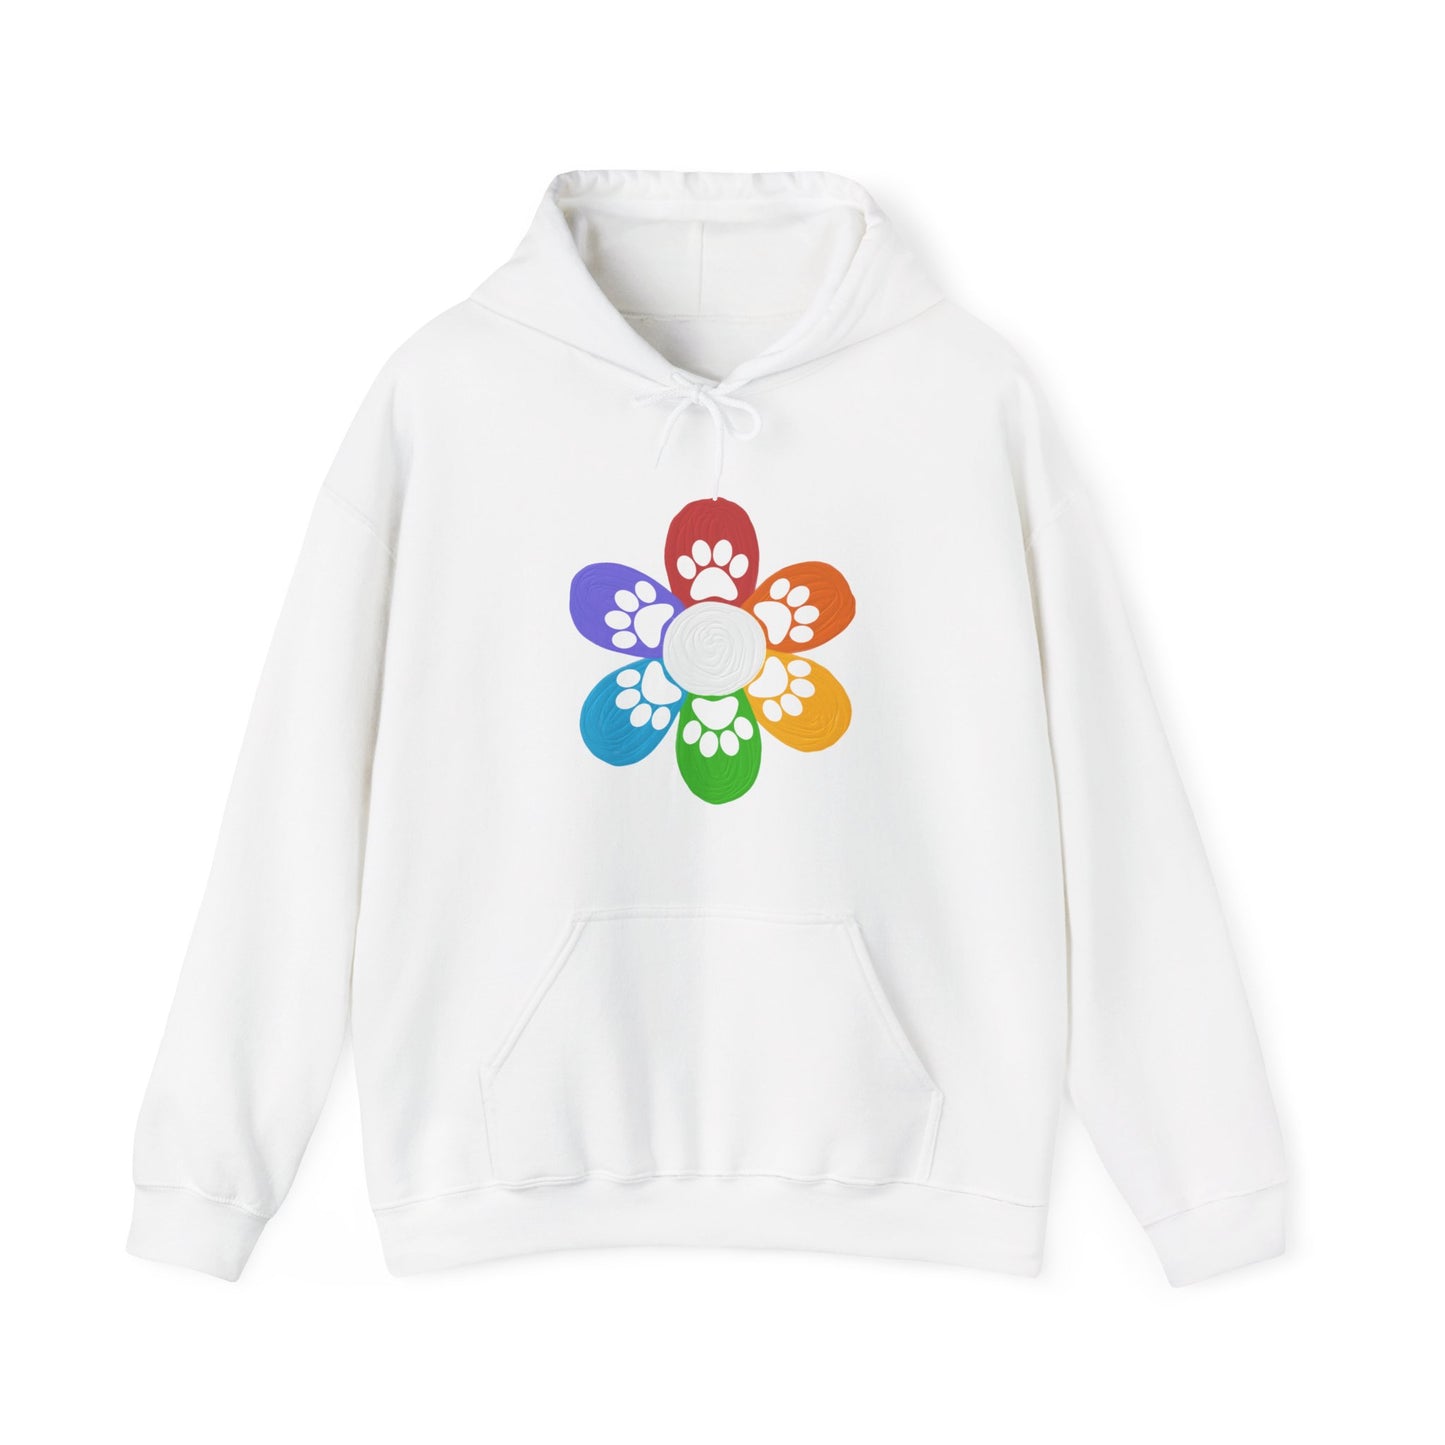 Against a white backdrop is a white  Dogs Pure Love hoodie displaying a colorful flower and dog paw print.